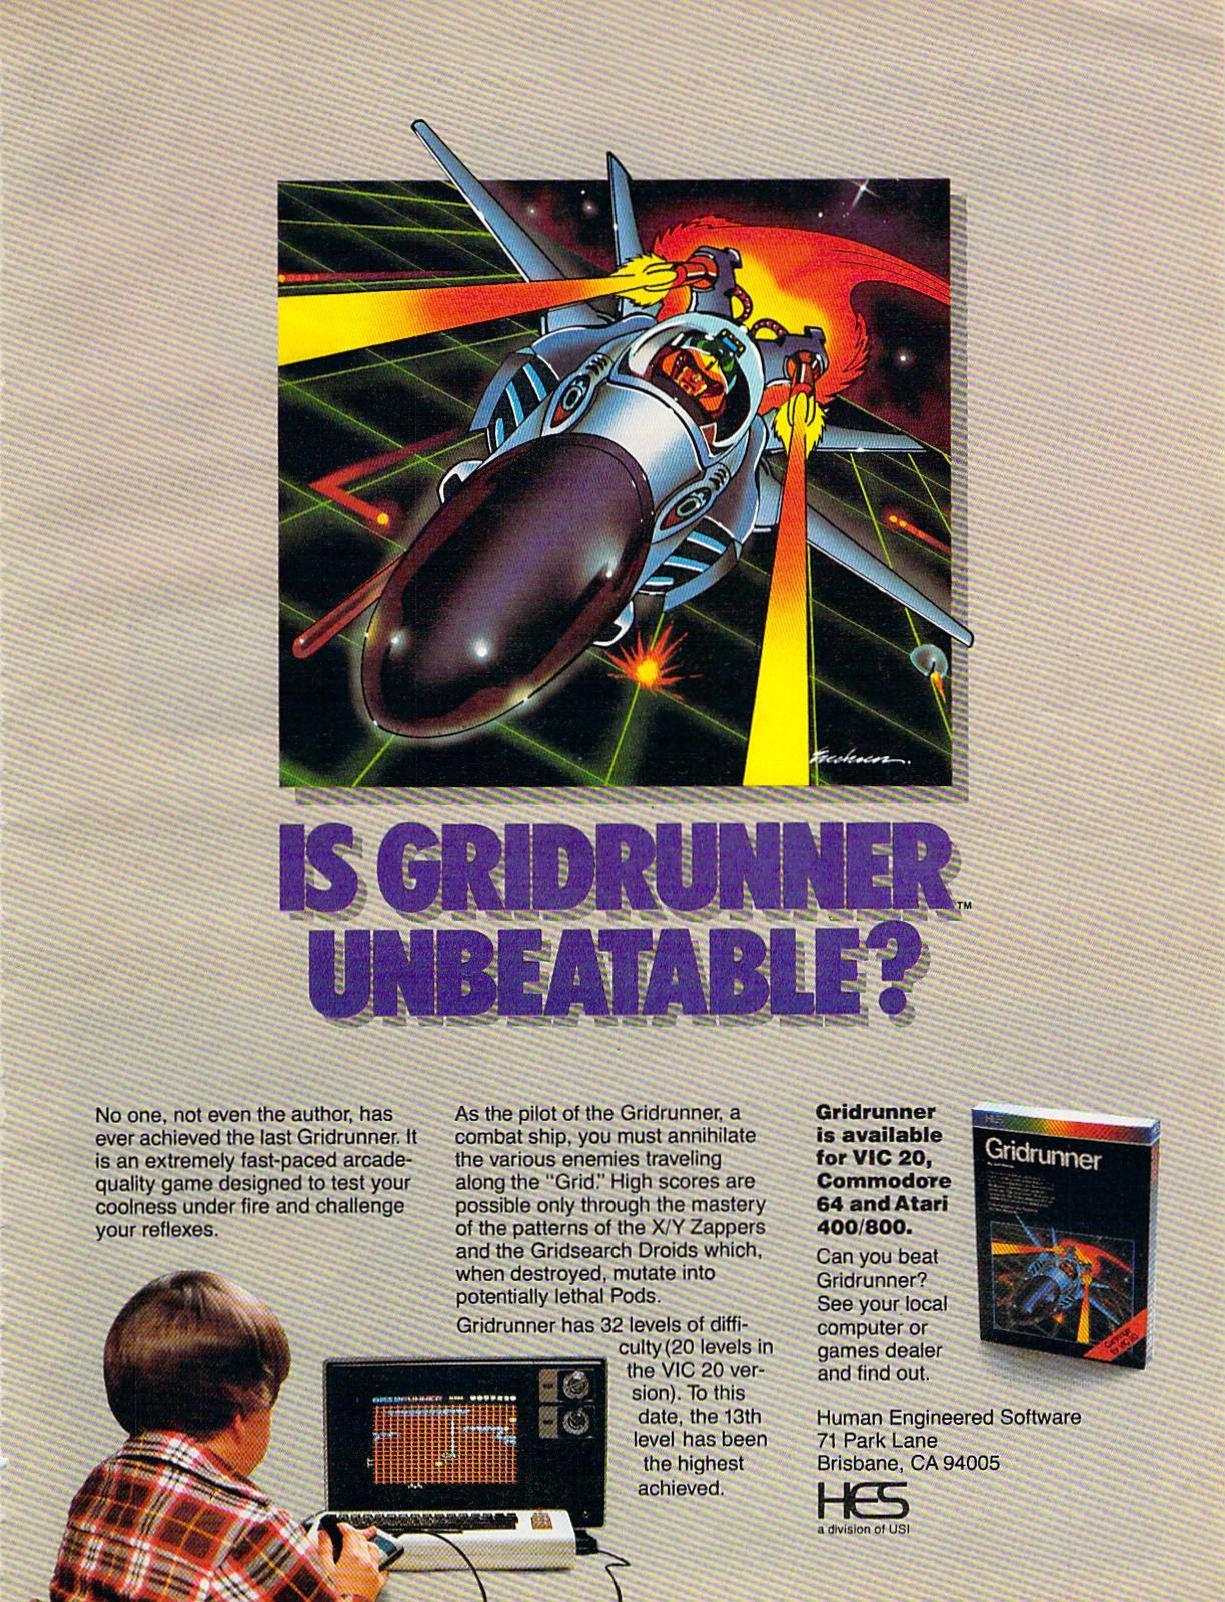 ‘Gridrunner’[ATARI 8-BIT / C64 / VIC-20] [USA] [MAGAZINE] [1983]
“Gridrunner is a series of shoot ‘em up games written by Jeff Minter/Llamasoft. The original Gridrunner was first published for the Commodore Vic 20 in 1982, and ported to various 8-bit...